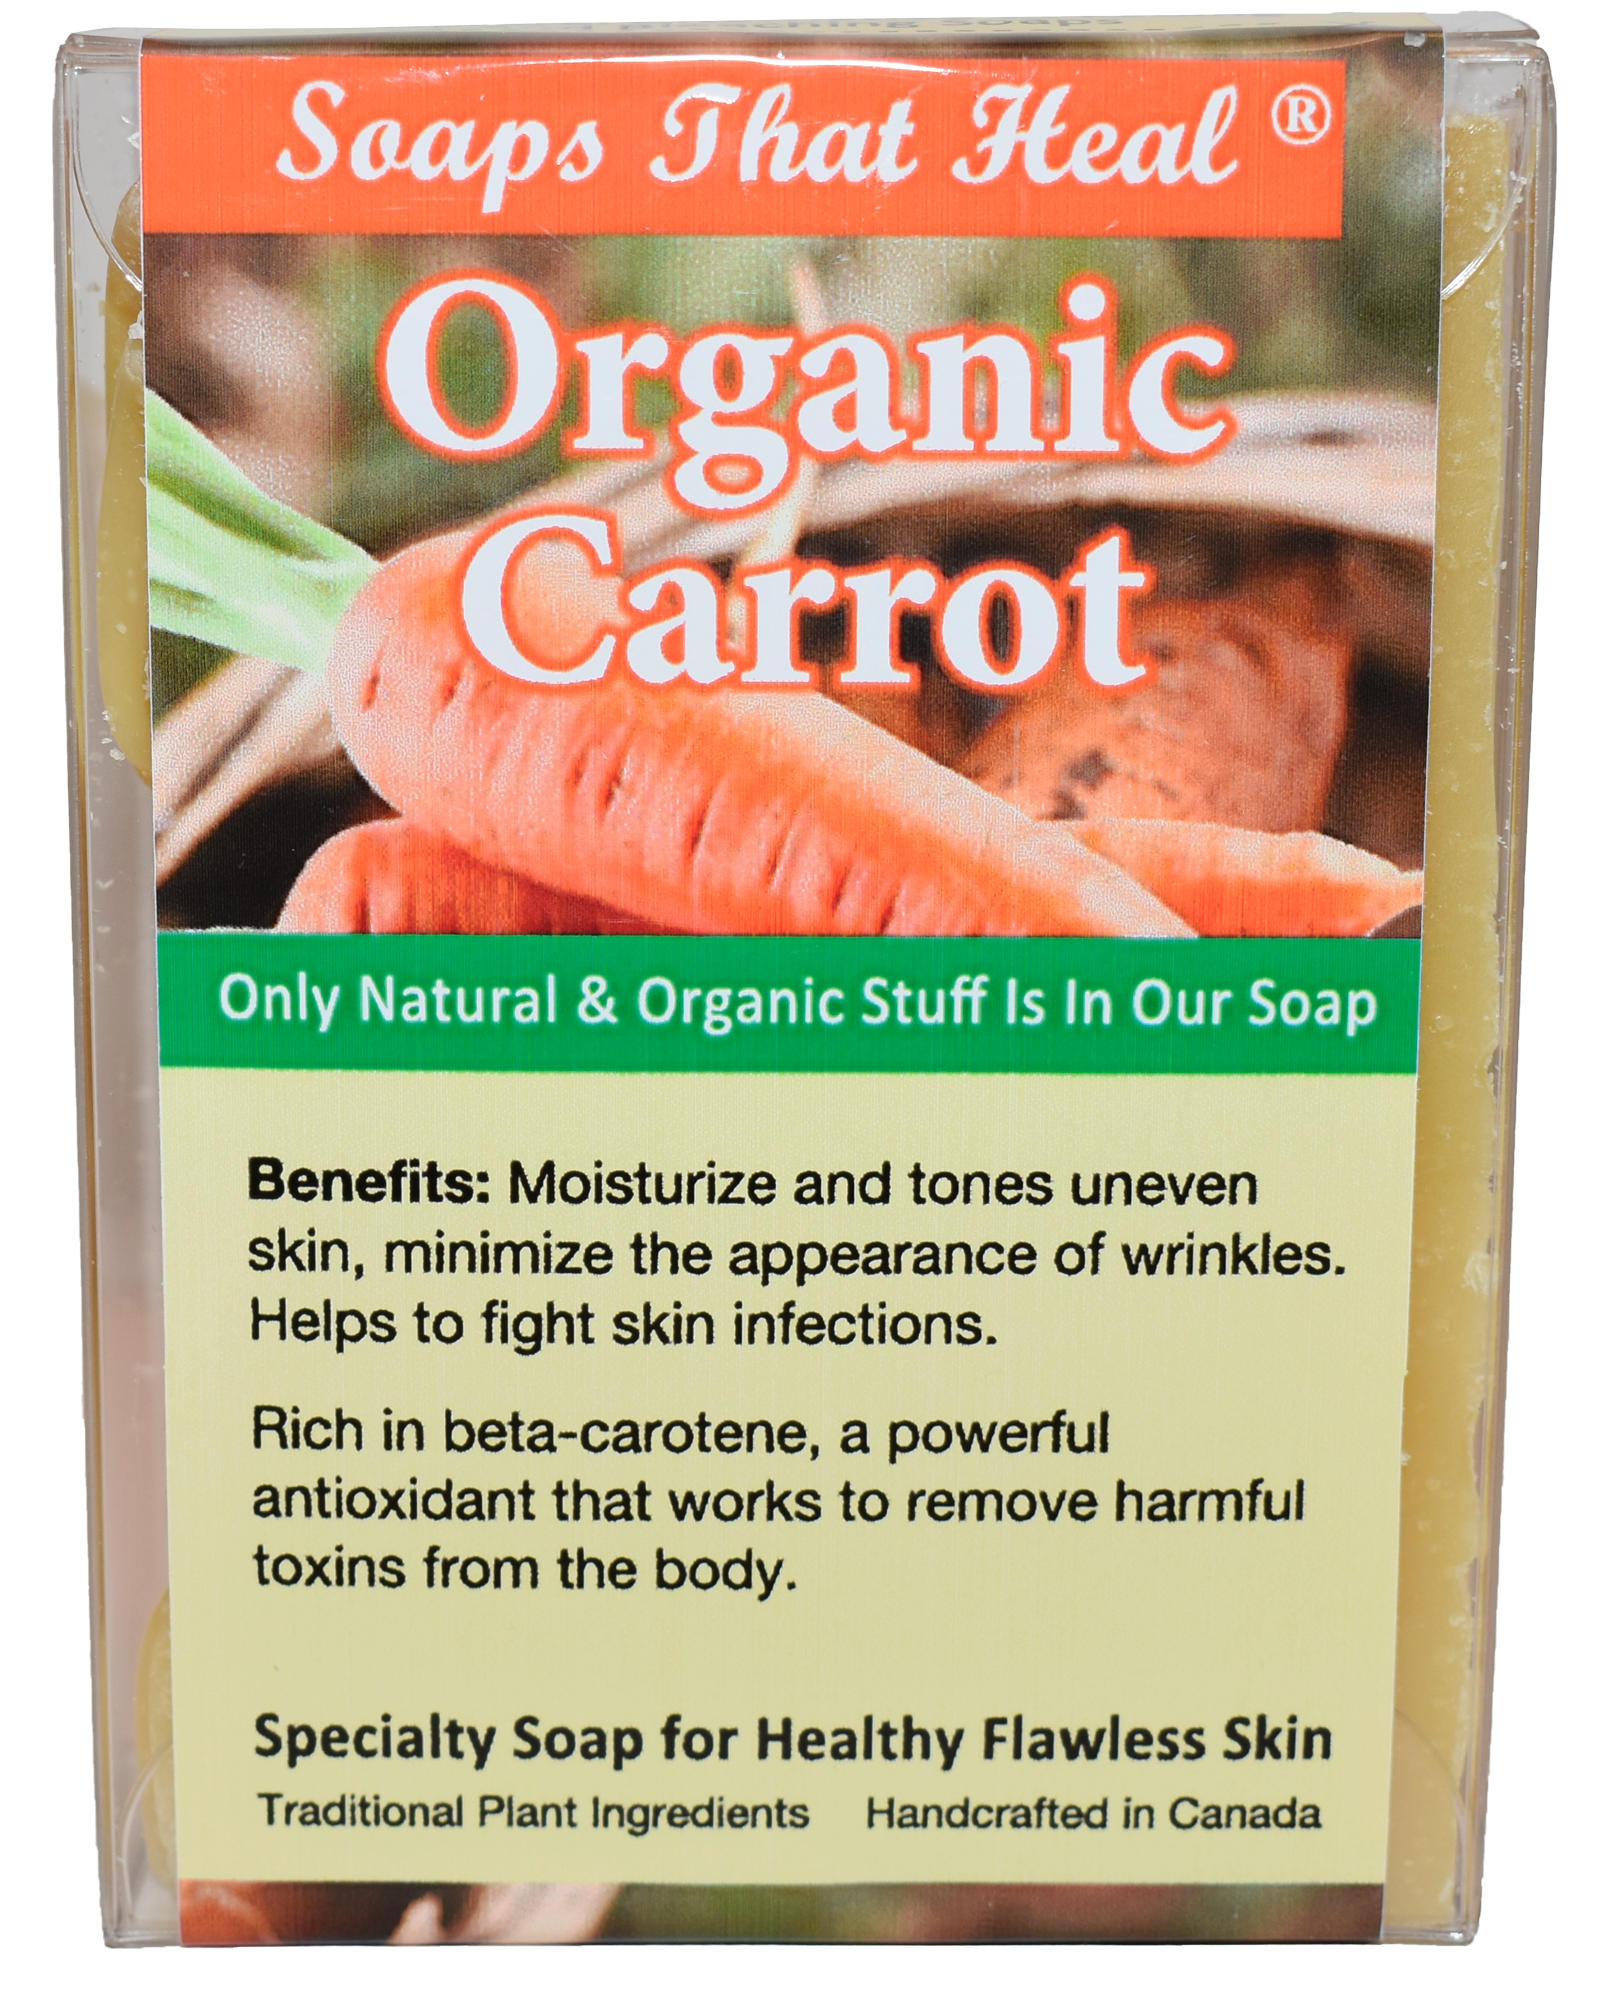 soaps that heal organic carrot soap minimize wrinkles moisturize body remove toxins flawless skin,Soaps That Heal - Organic Carrot Soap  Rich in beta-carotene - Helps to fight skin infections  Key Benefits Moisturizes and tones uneven skin  Minimizes the appearance of wrinkles Anti-aging , oilblends,oil blends, uncle benneys